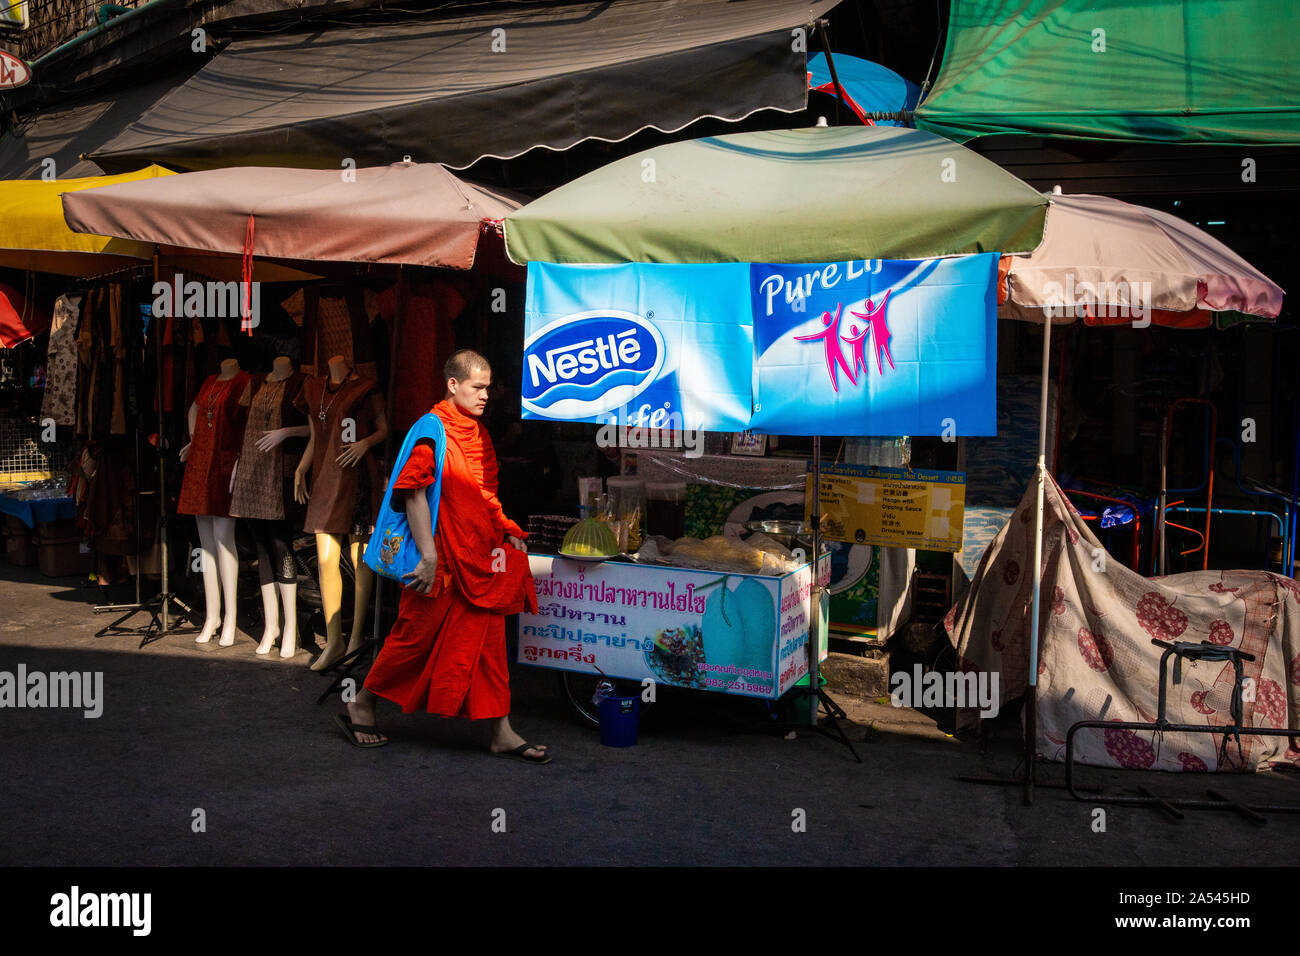 Buddhist monk in orange robe walking in shopping area in Chiang Mai, Thailand. Stock Photo